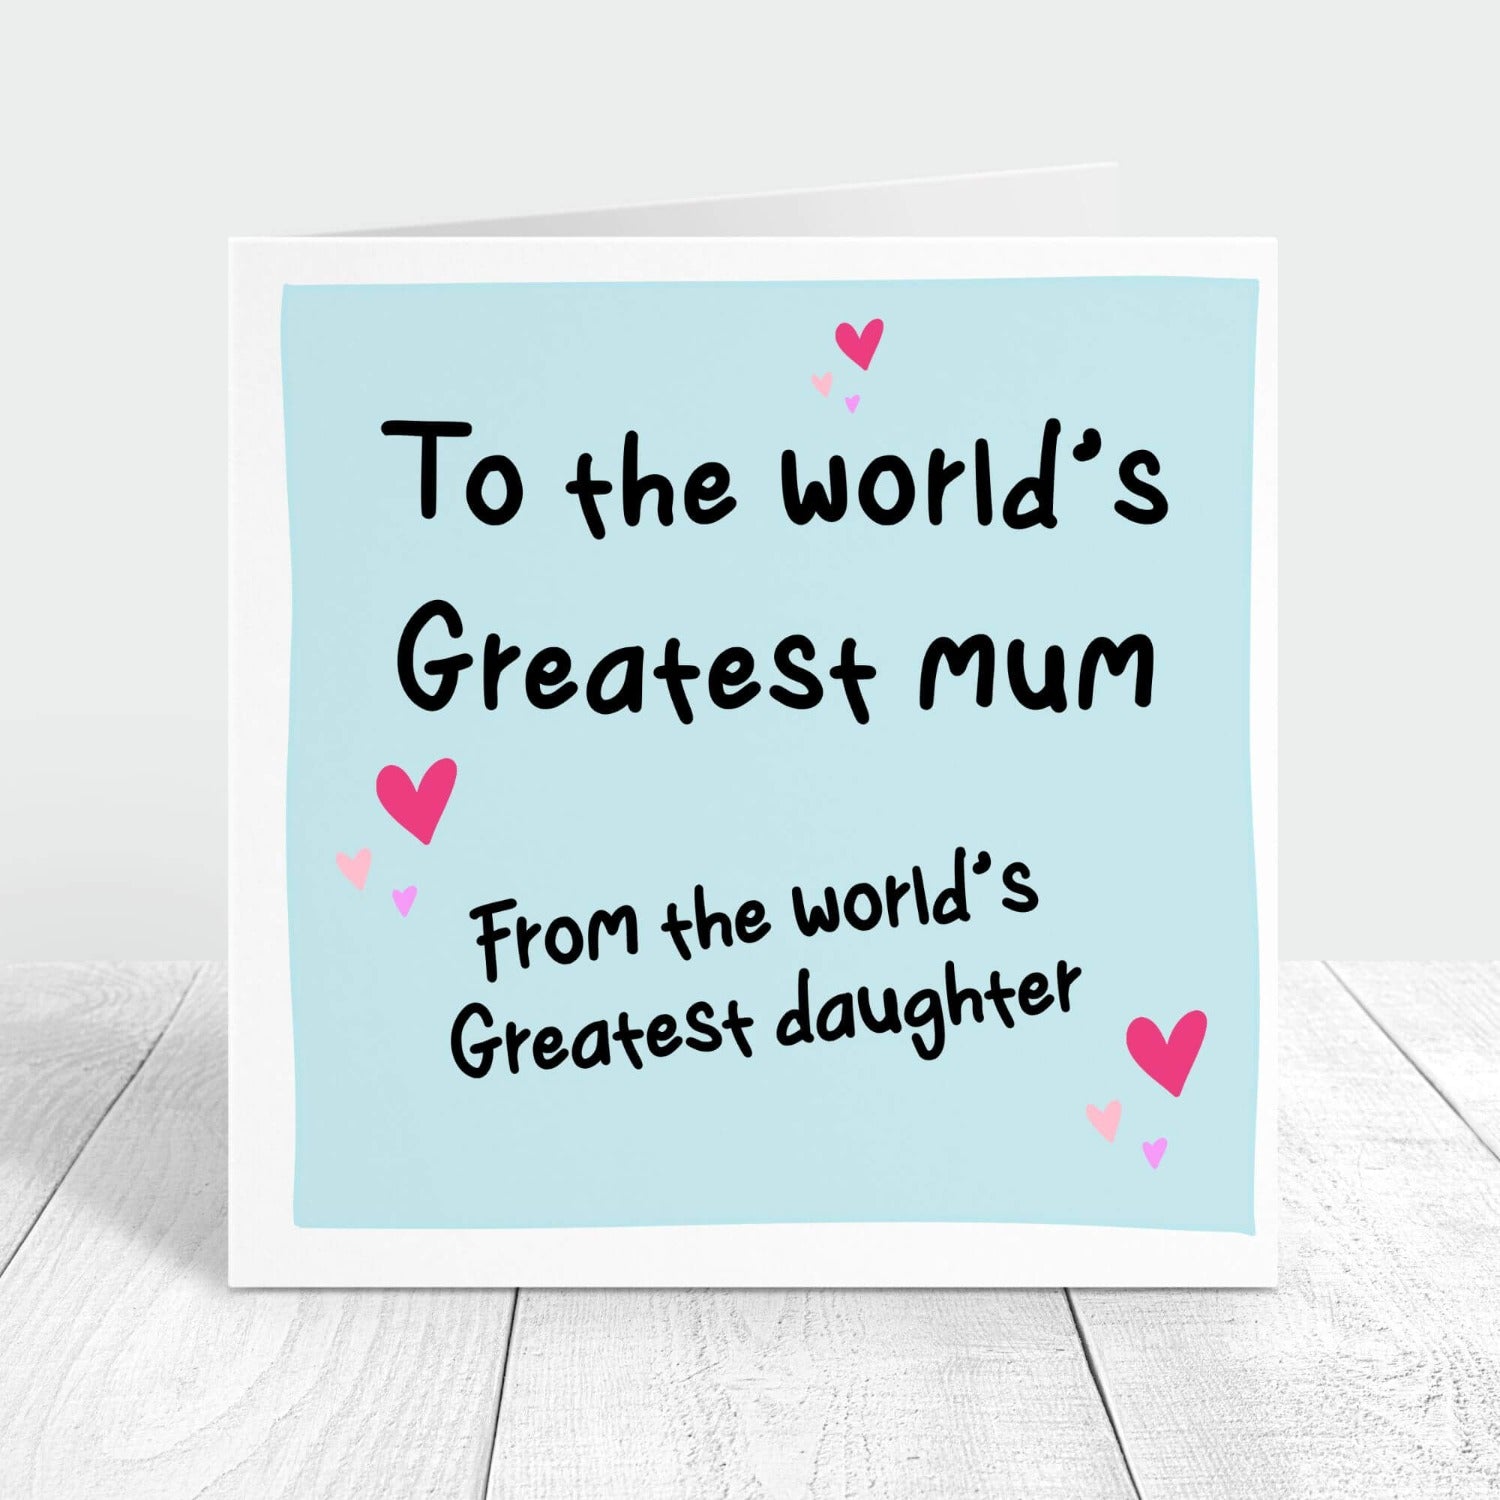 To the world's greatest mum from the world's greatest daughter